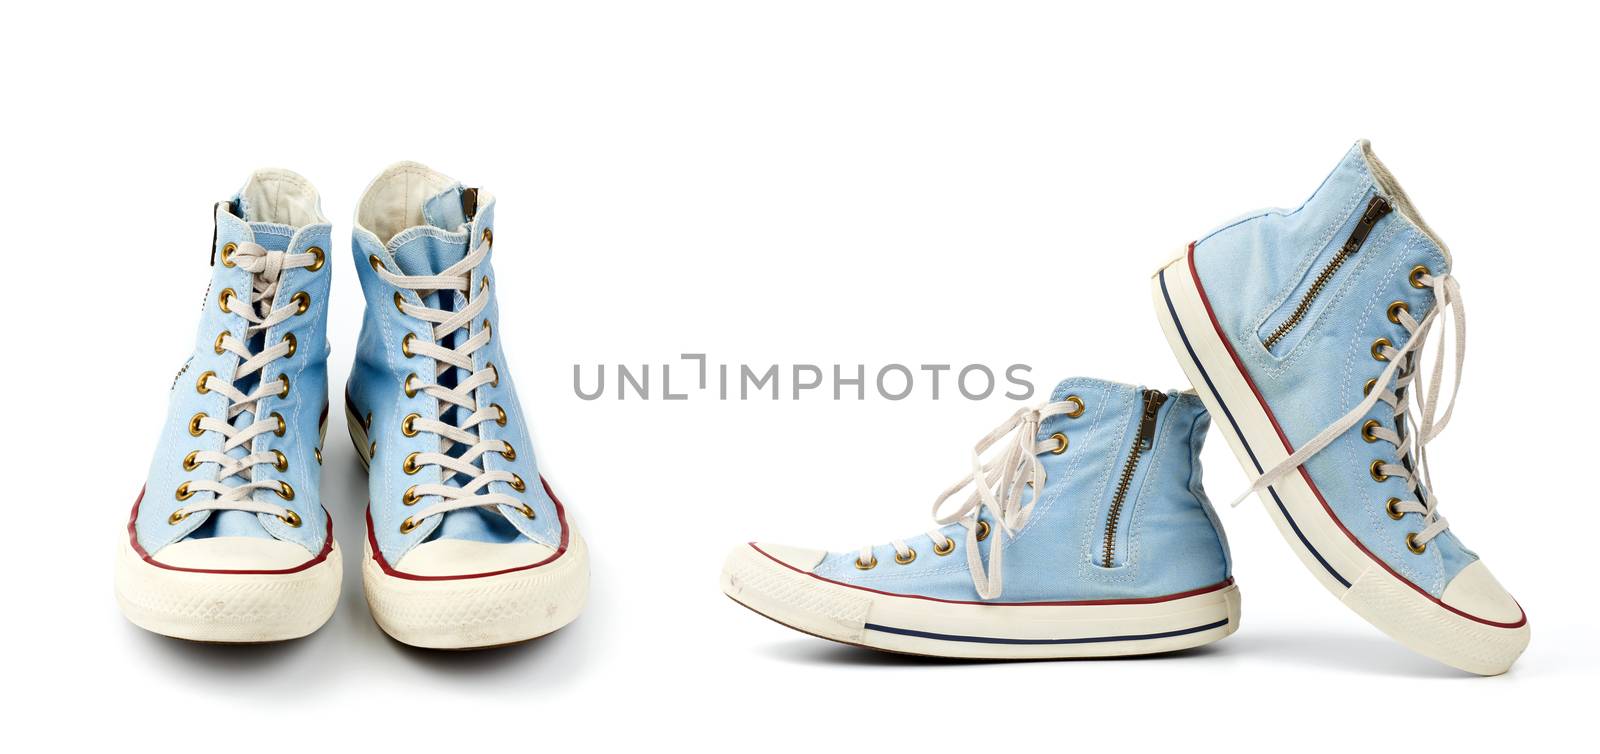 pair of light blue worn textile sneakers with laces and zippers on a white background, side view of shoes and front view, set